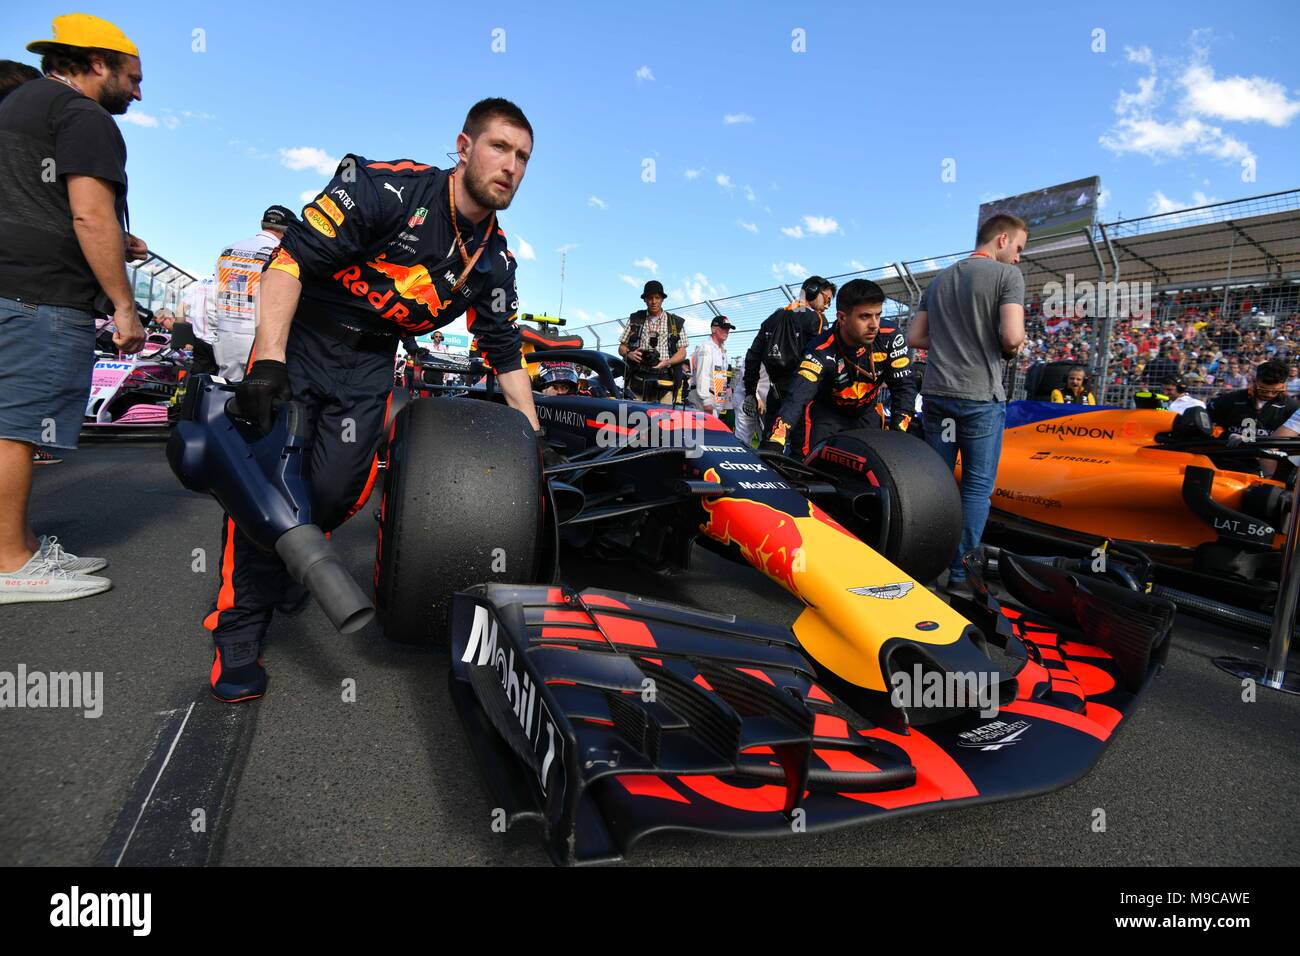 Albert Park, Melbourne, Australia. 25th Mar, 2018. Mechanics wheel the car of Max Verstappen (NLD) #33 from the Aston Martin Red Bull Racing team on the grid prior to the start of the 2018 Australian Formula One Grand Prix at Albert Park, Melbourne, Australia. Sydney Low/Cal Sport Media/Alamy Live News Stock Photo